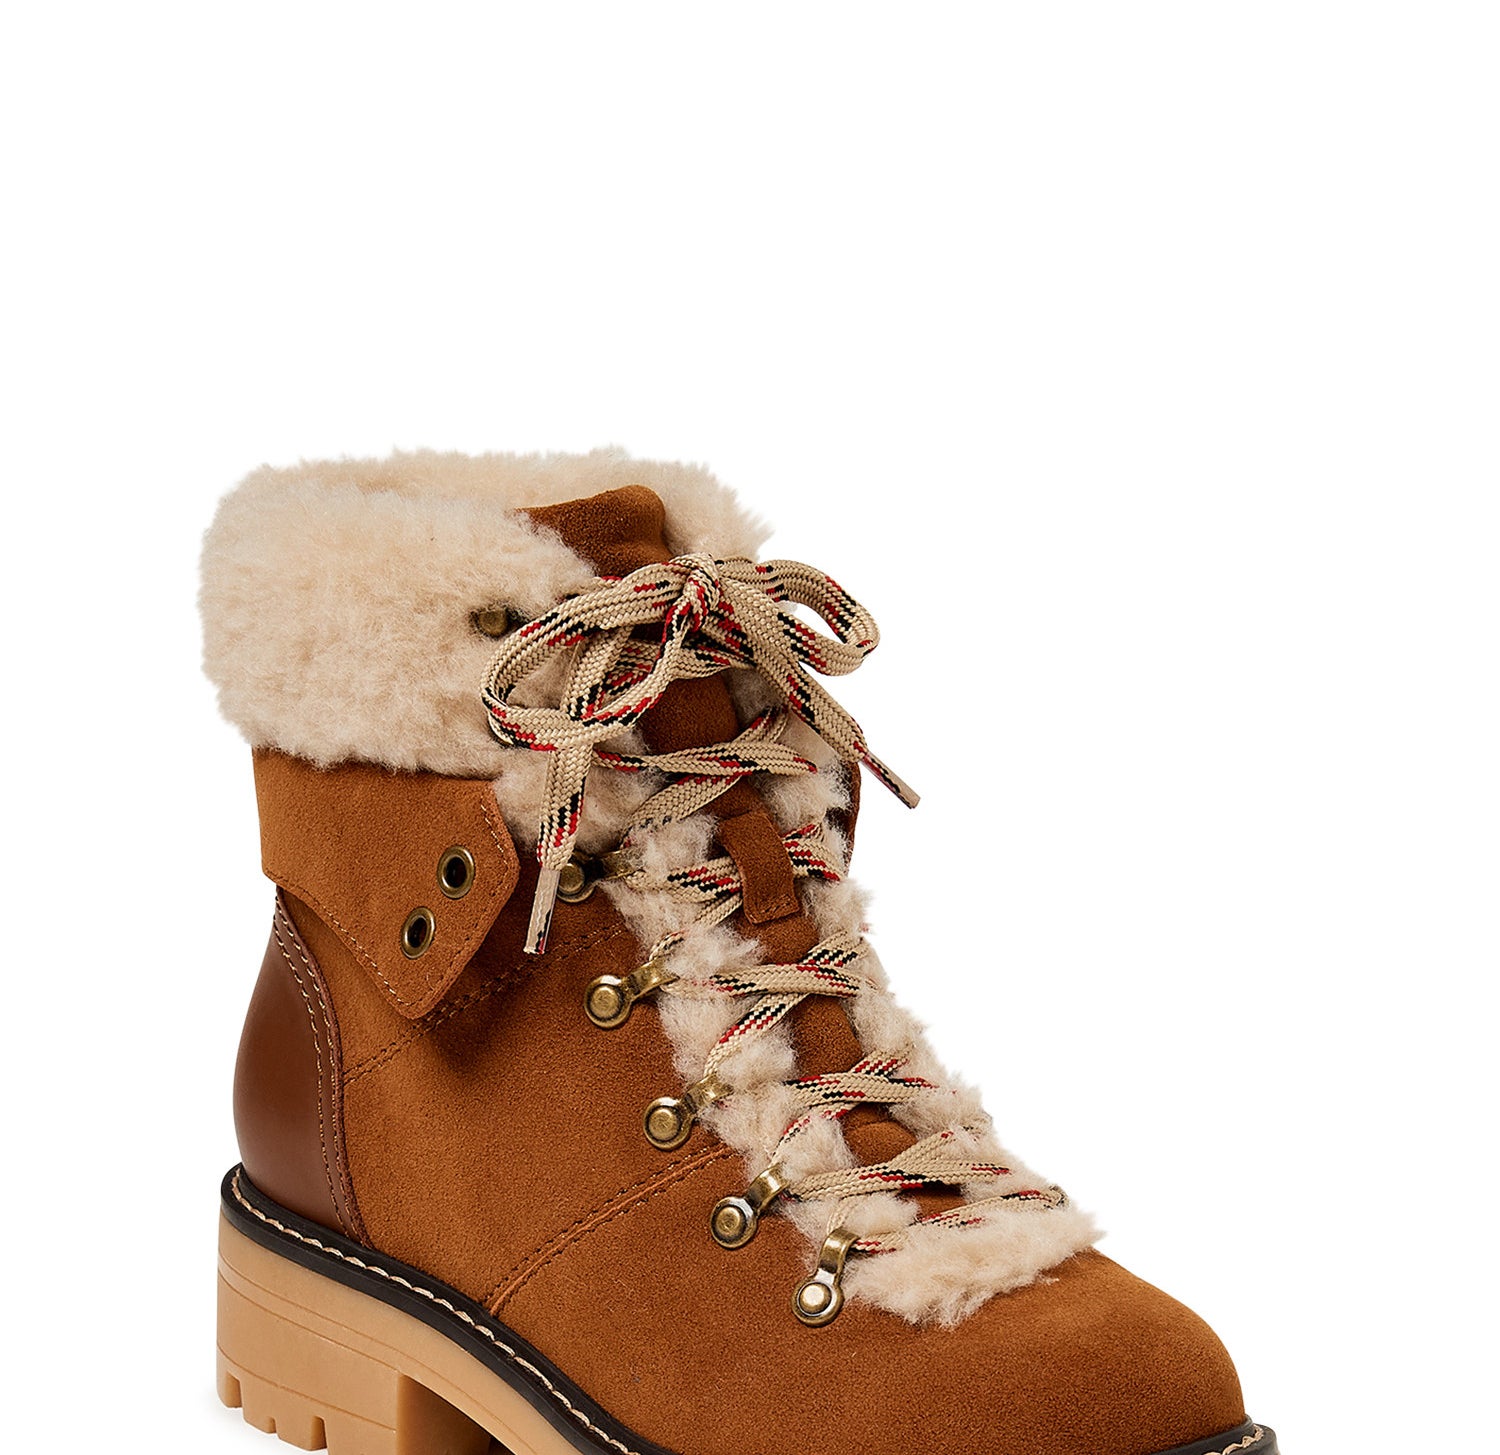 The tan pair of cozy hiker boots